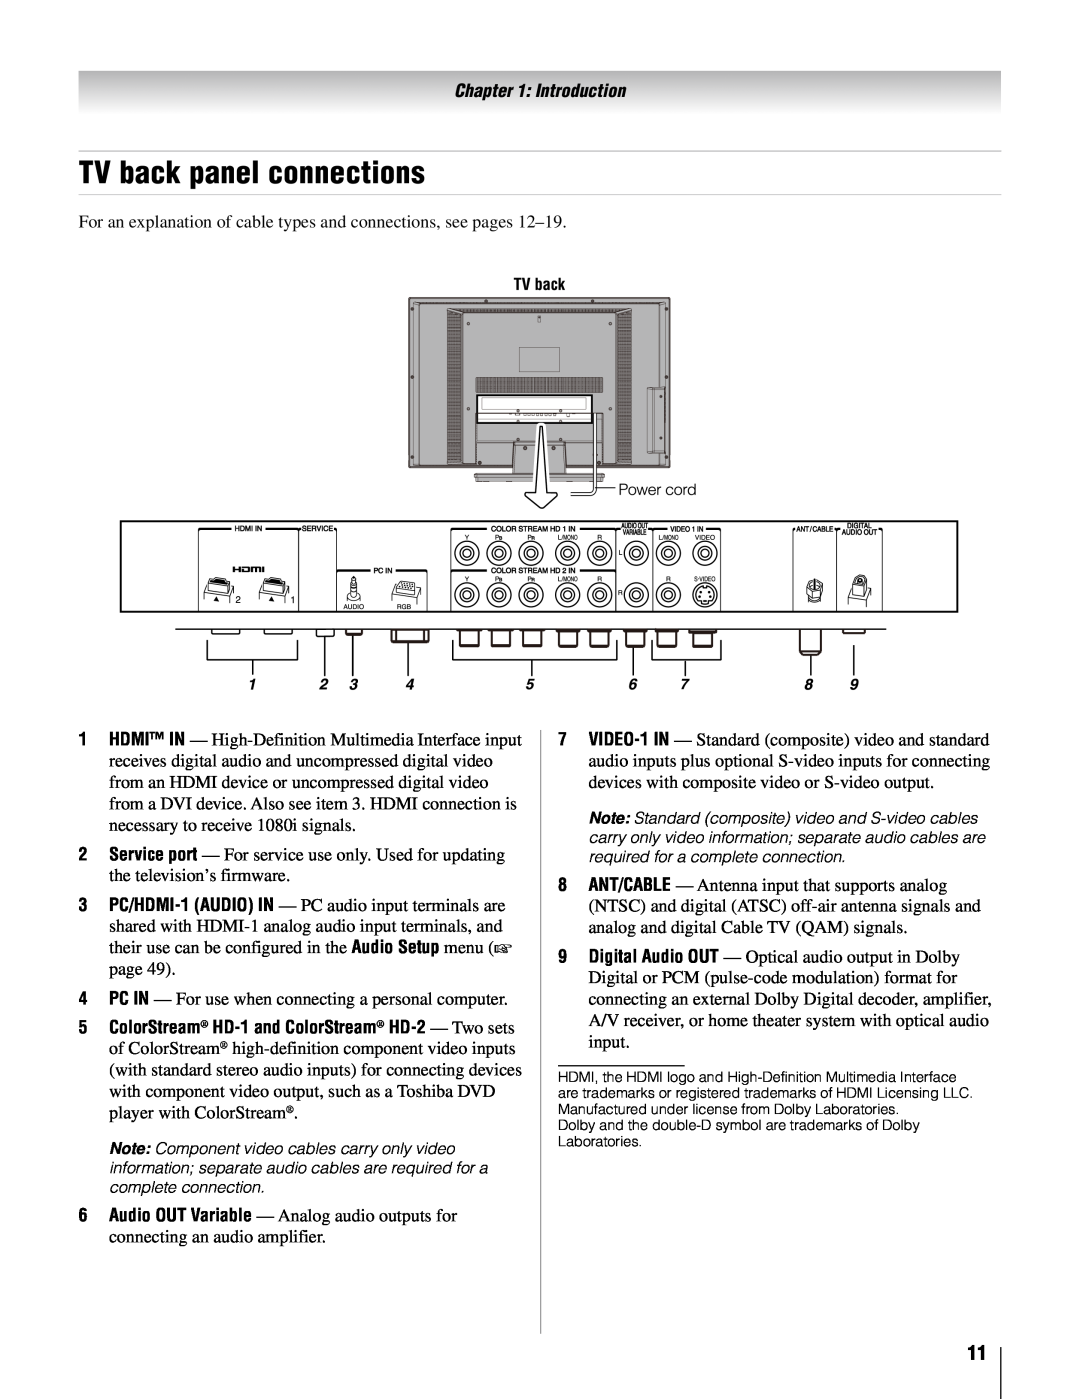 Toshiba 26AV502U, 32AV502U, 32AV50SU, 37AV52U, 37AV502U, 26AV52U owner manual TV back panel connections, Introduction 